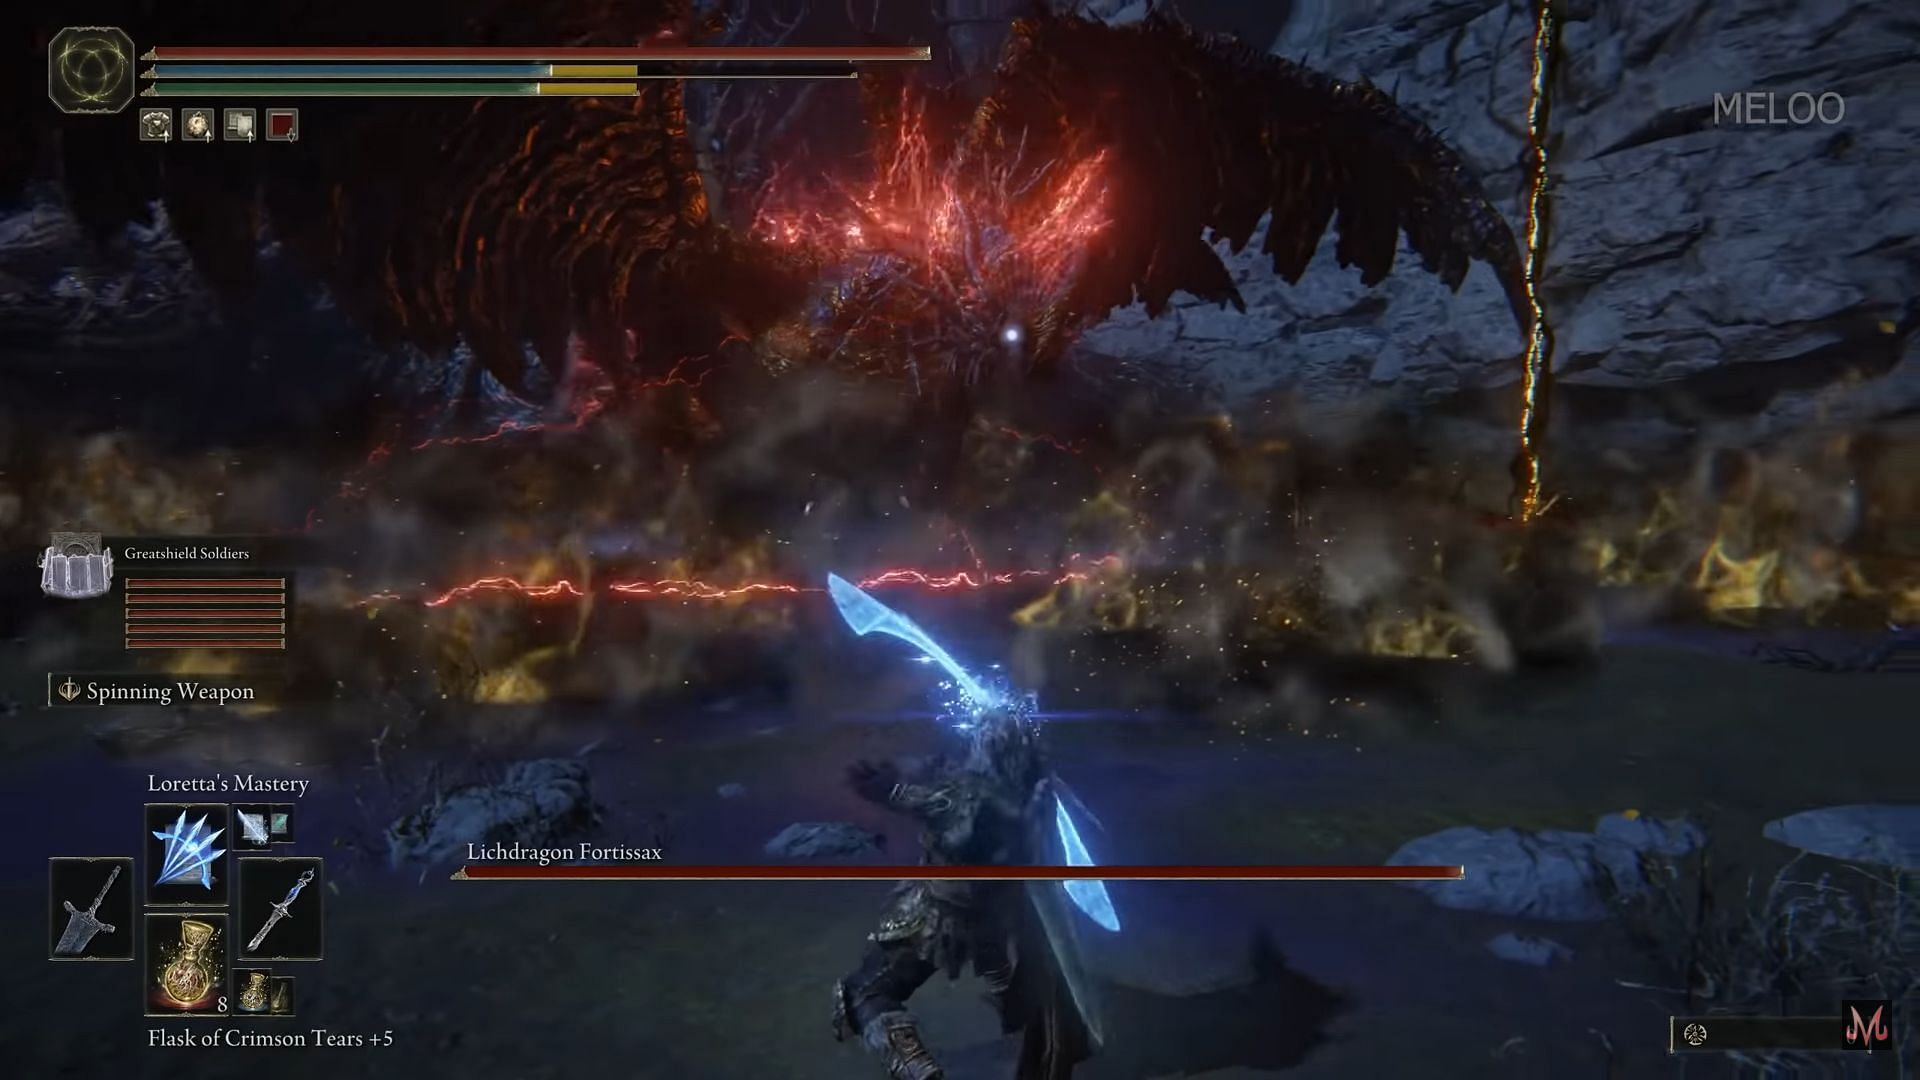 Lichdragon Fortissax in Elden Ring is the best dragon fight ever in a Soulsborne game (Image via Meloo/YouTube)